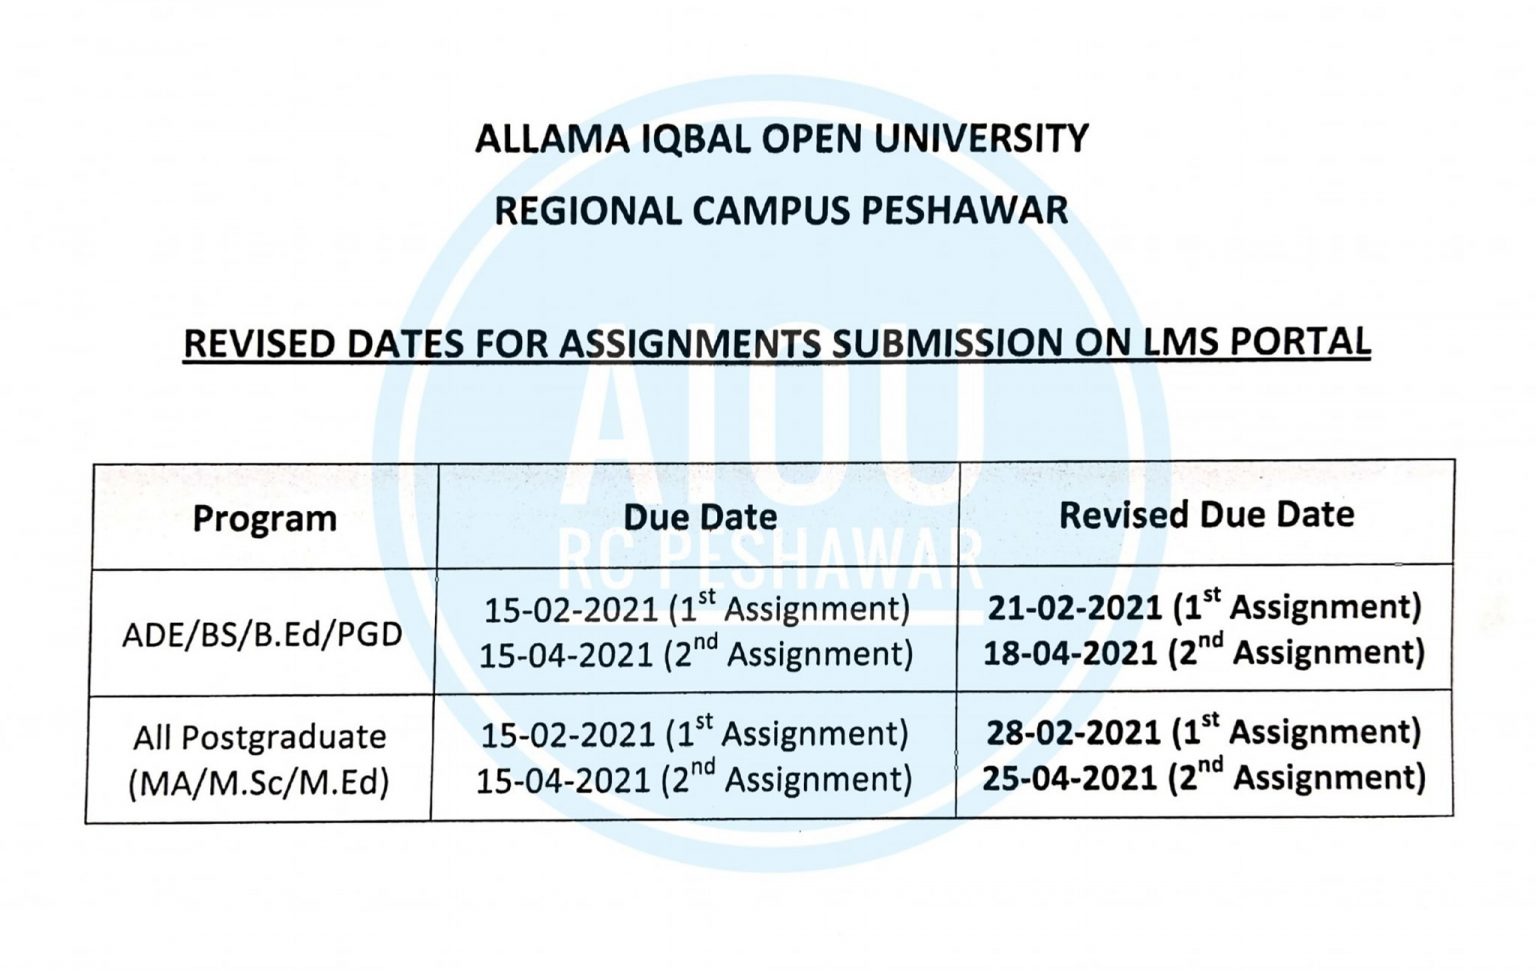 last date for assignment submission aiou